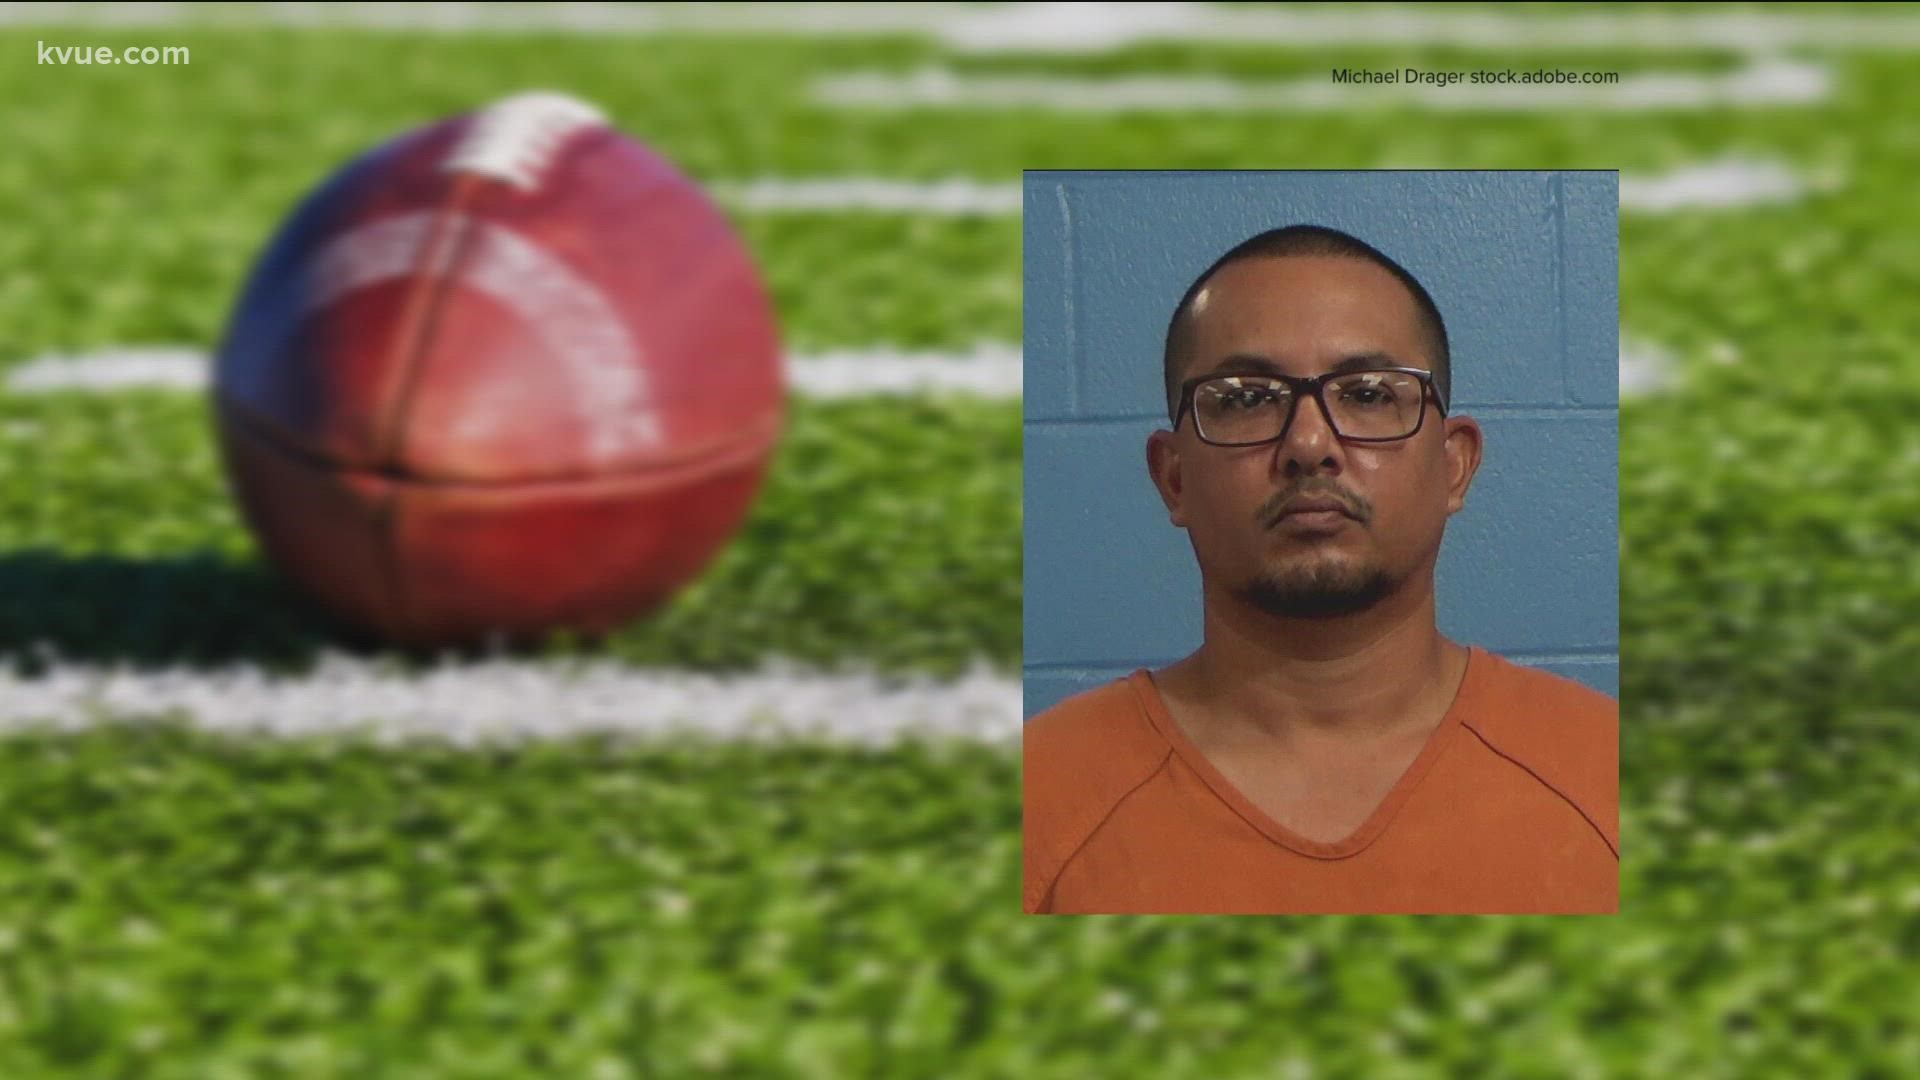 A Round Rock man was arrested Wednesday, accused of indecency with a child. He is the former president of a youth football and cheer association in Hutto.